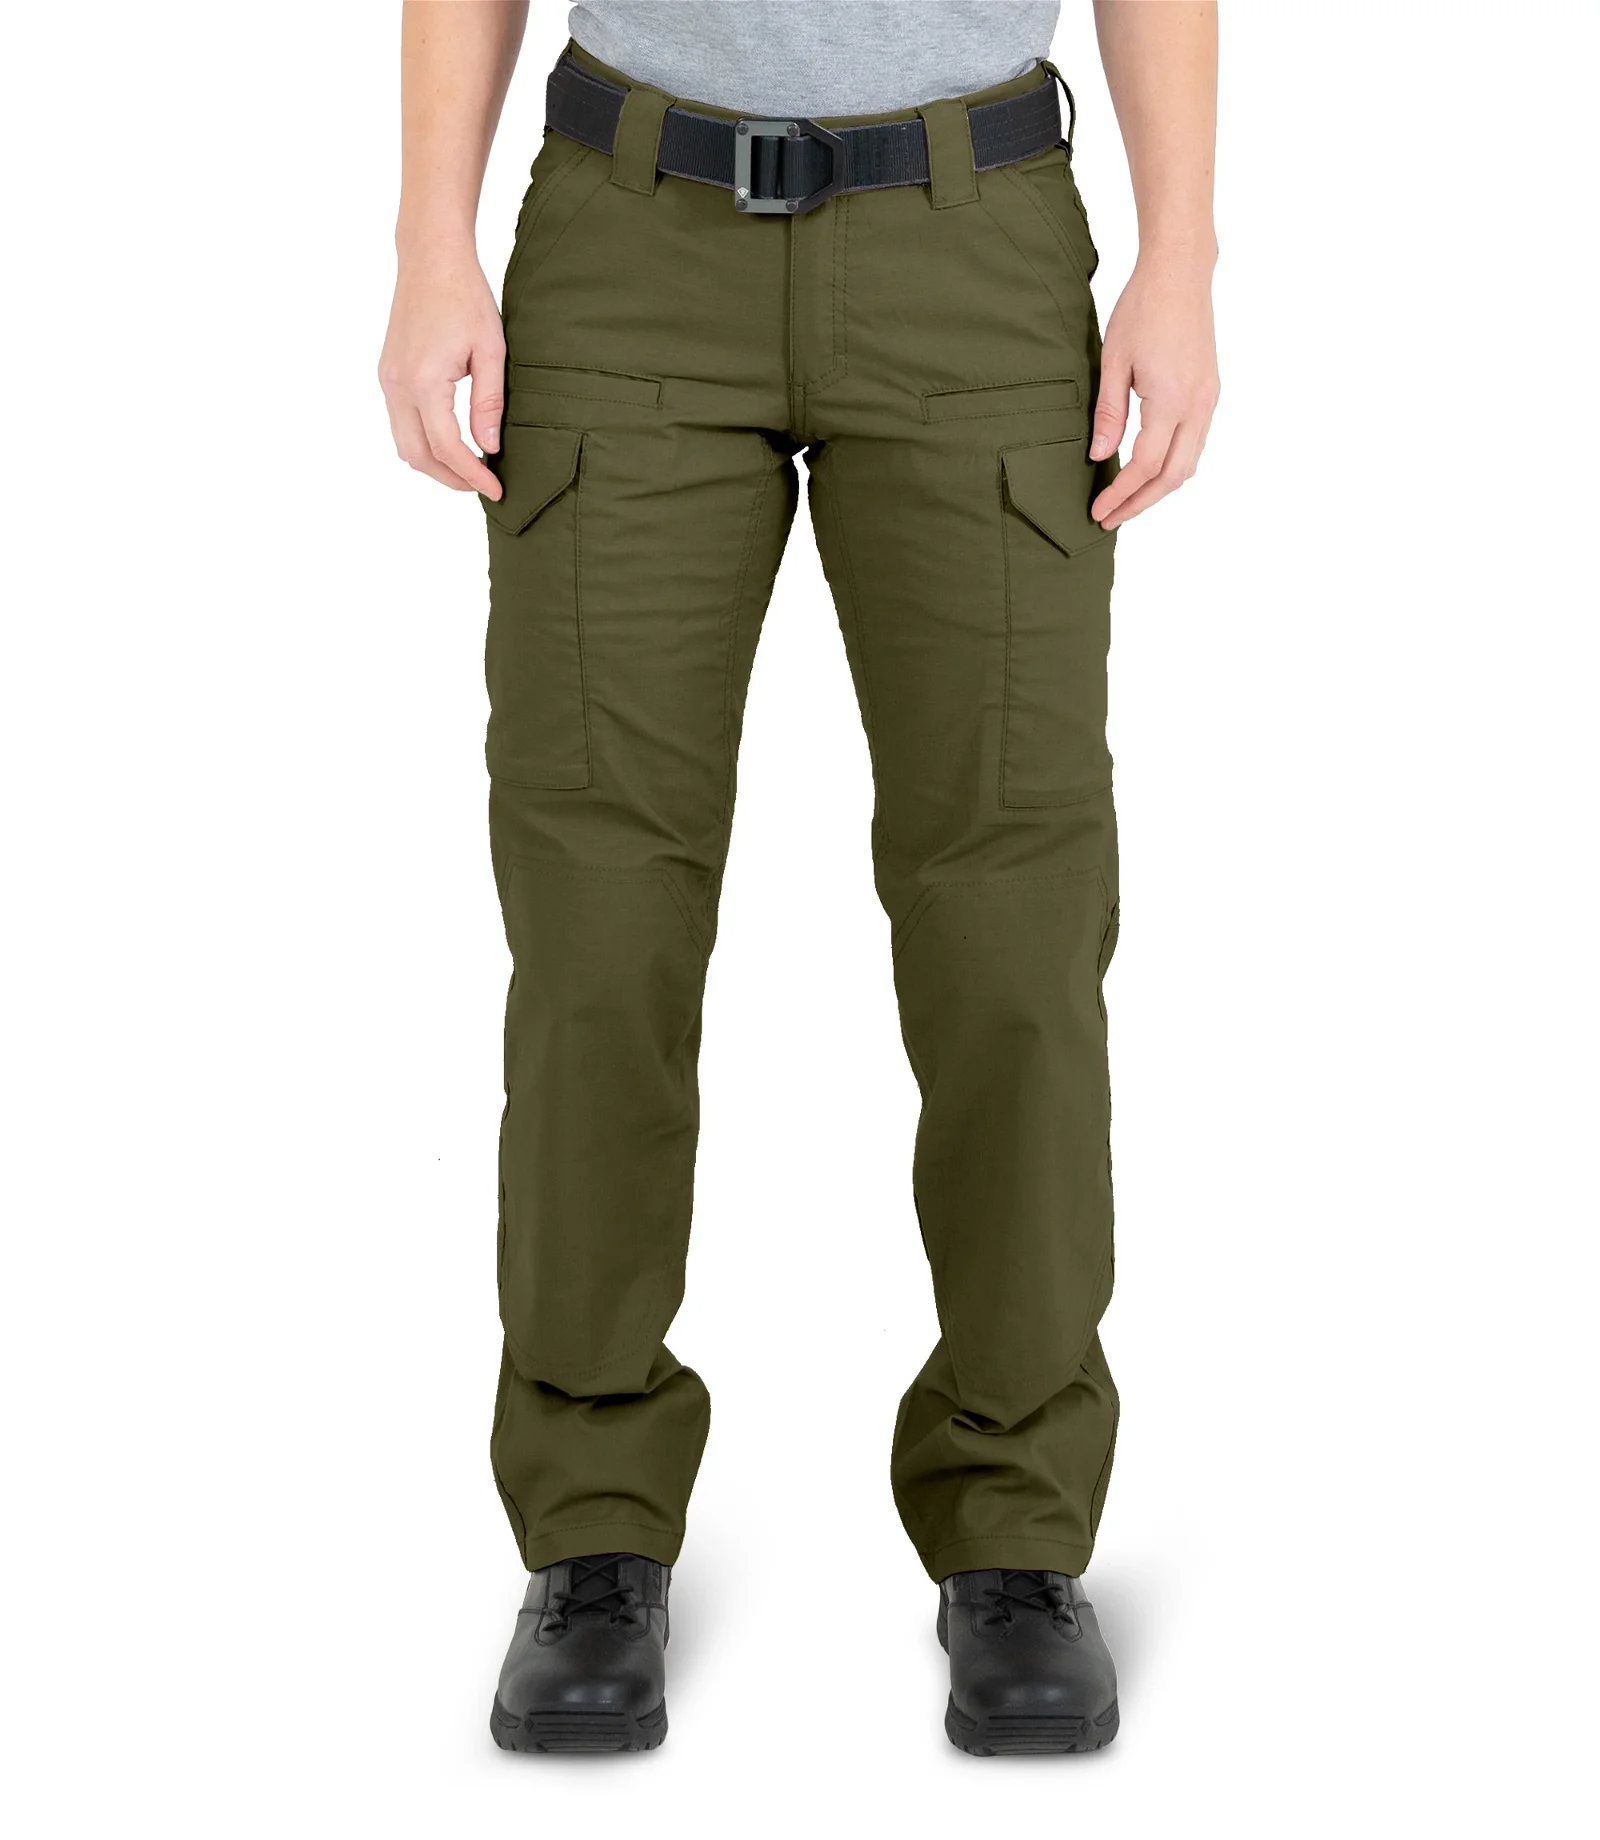 Image of Women's V2 Tactical Pants - Tundra